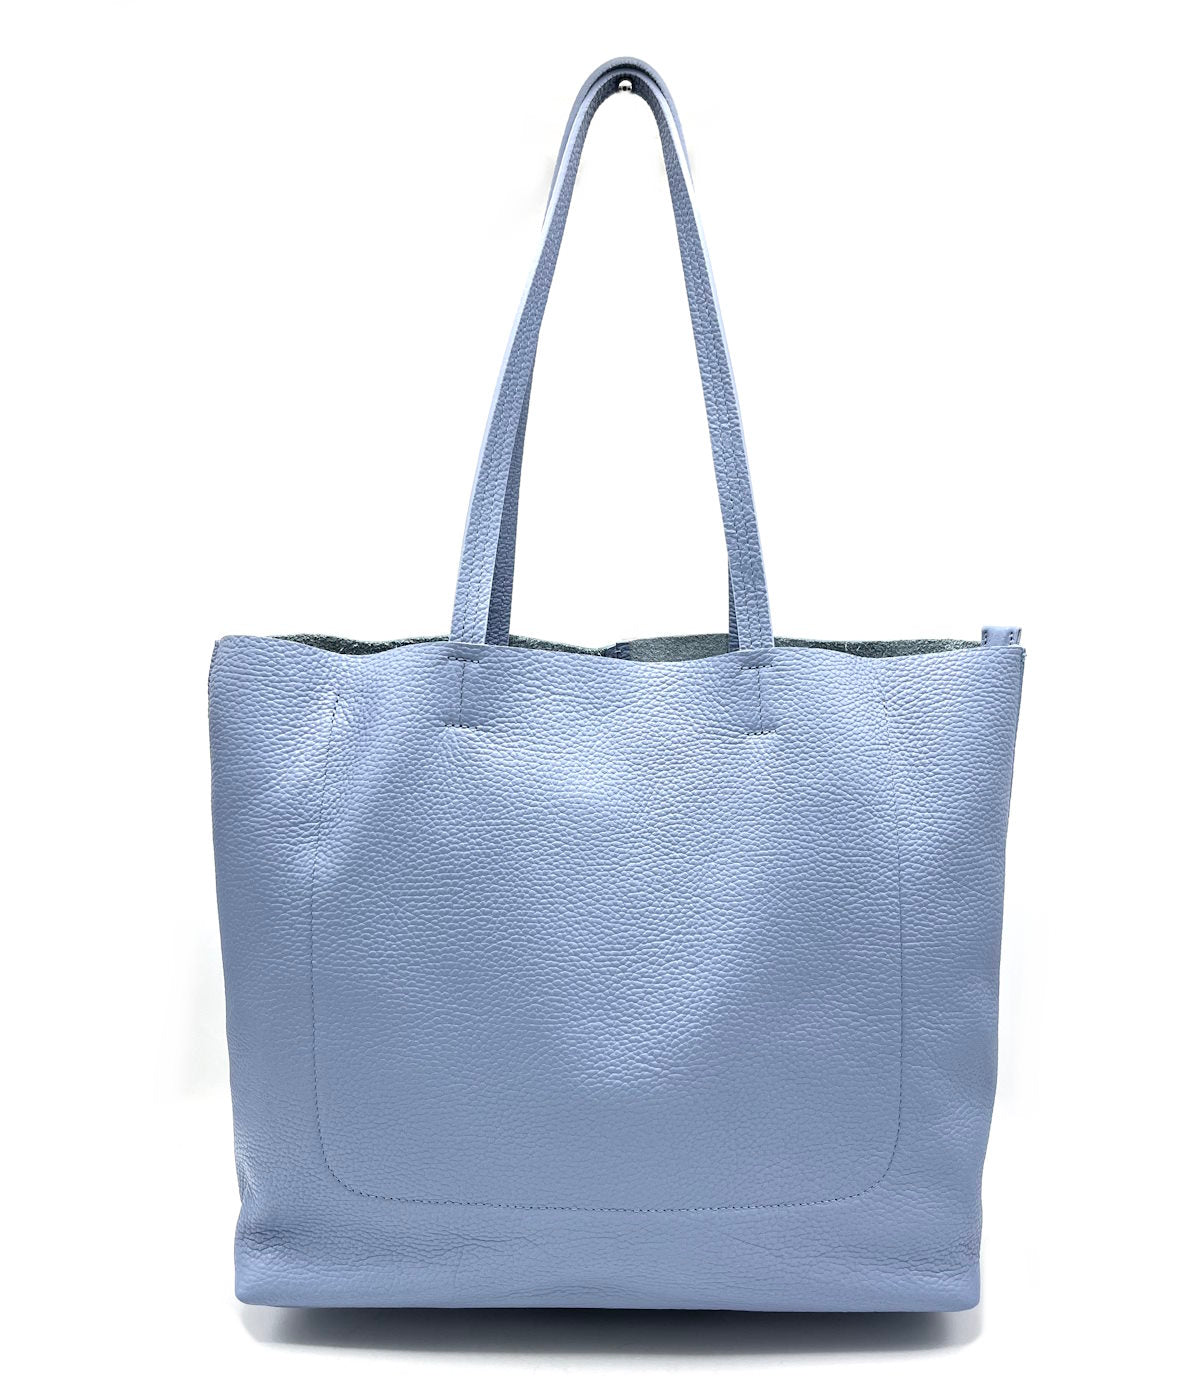 Genuine leather shopping bag, for women, Made in Italy, art. 112443